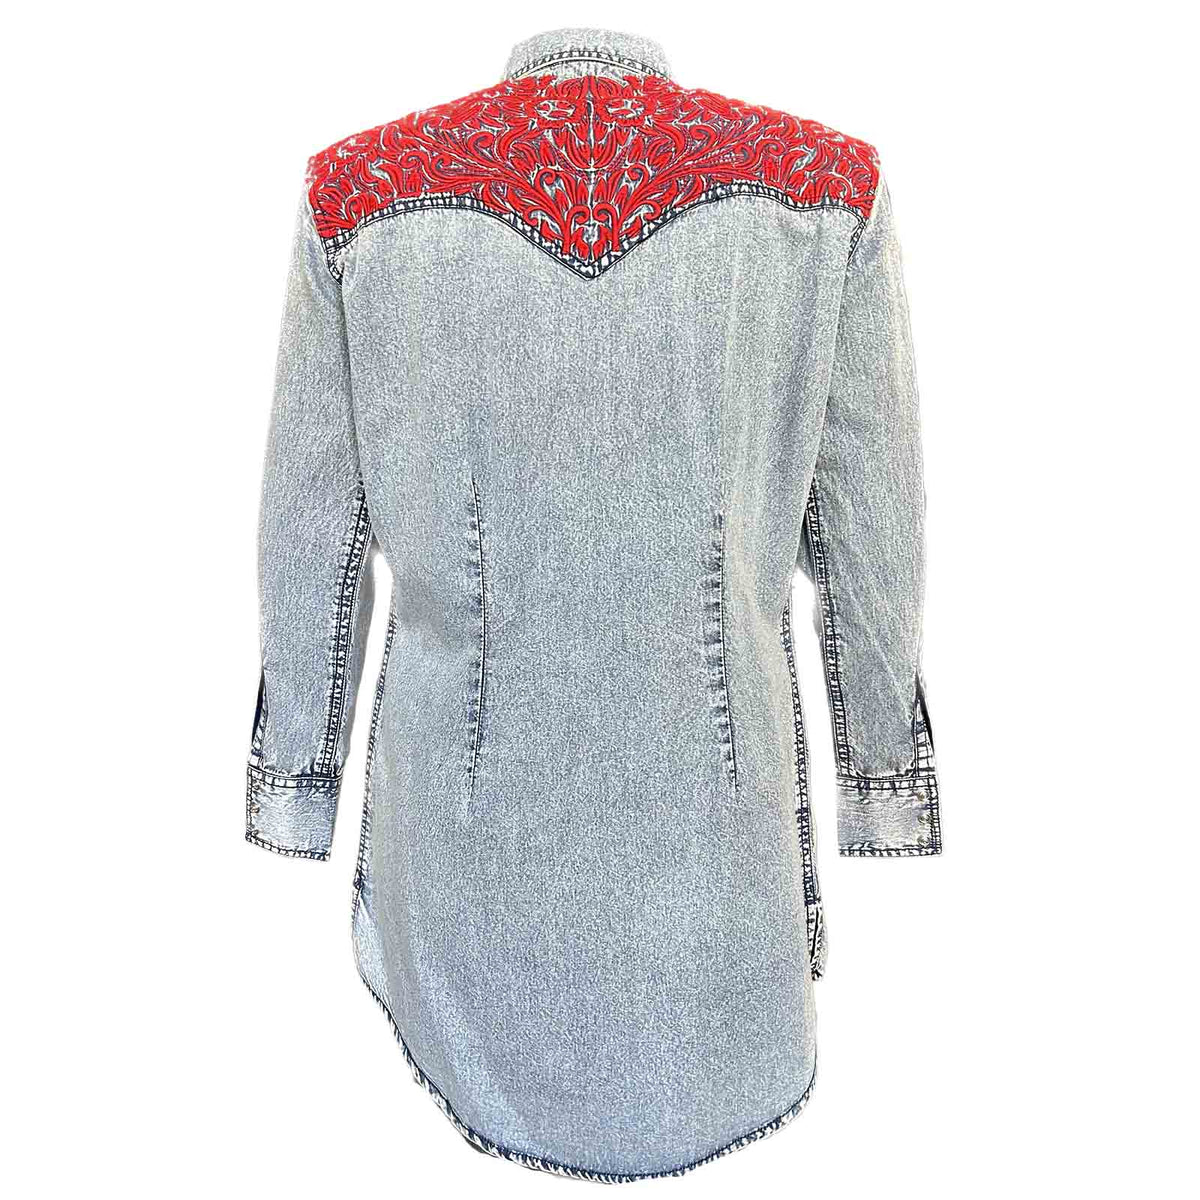 Women's Denim & Red Tooling Embroidery Western Shirt Dress